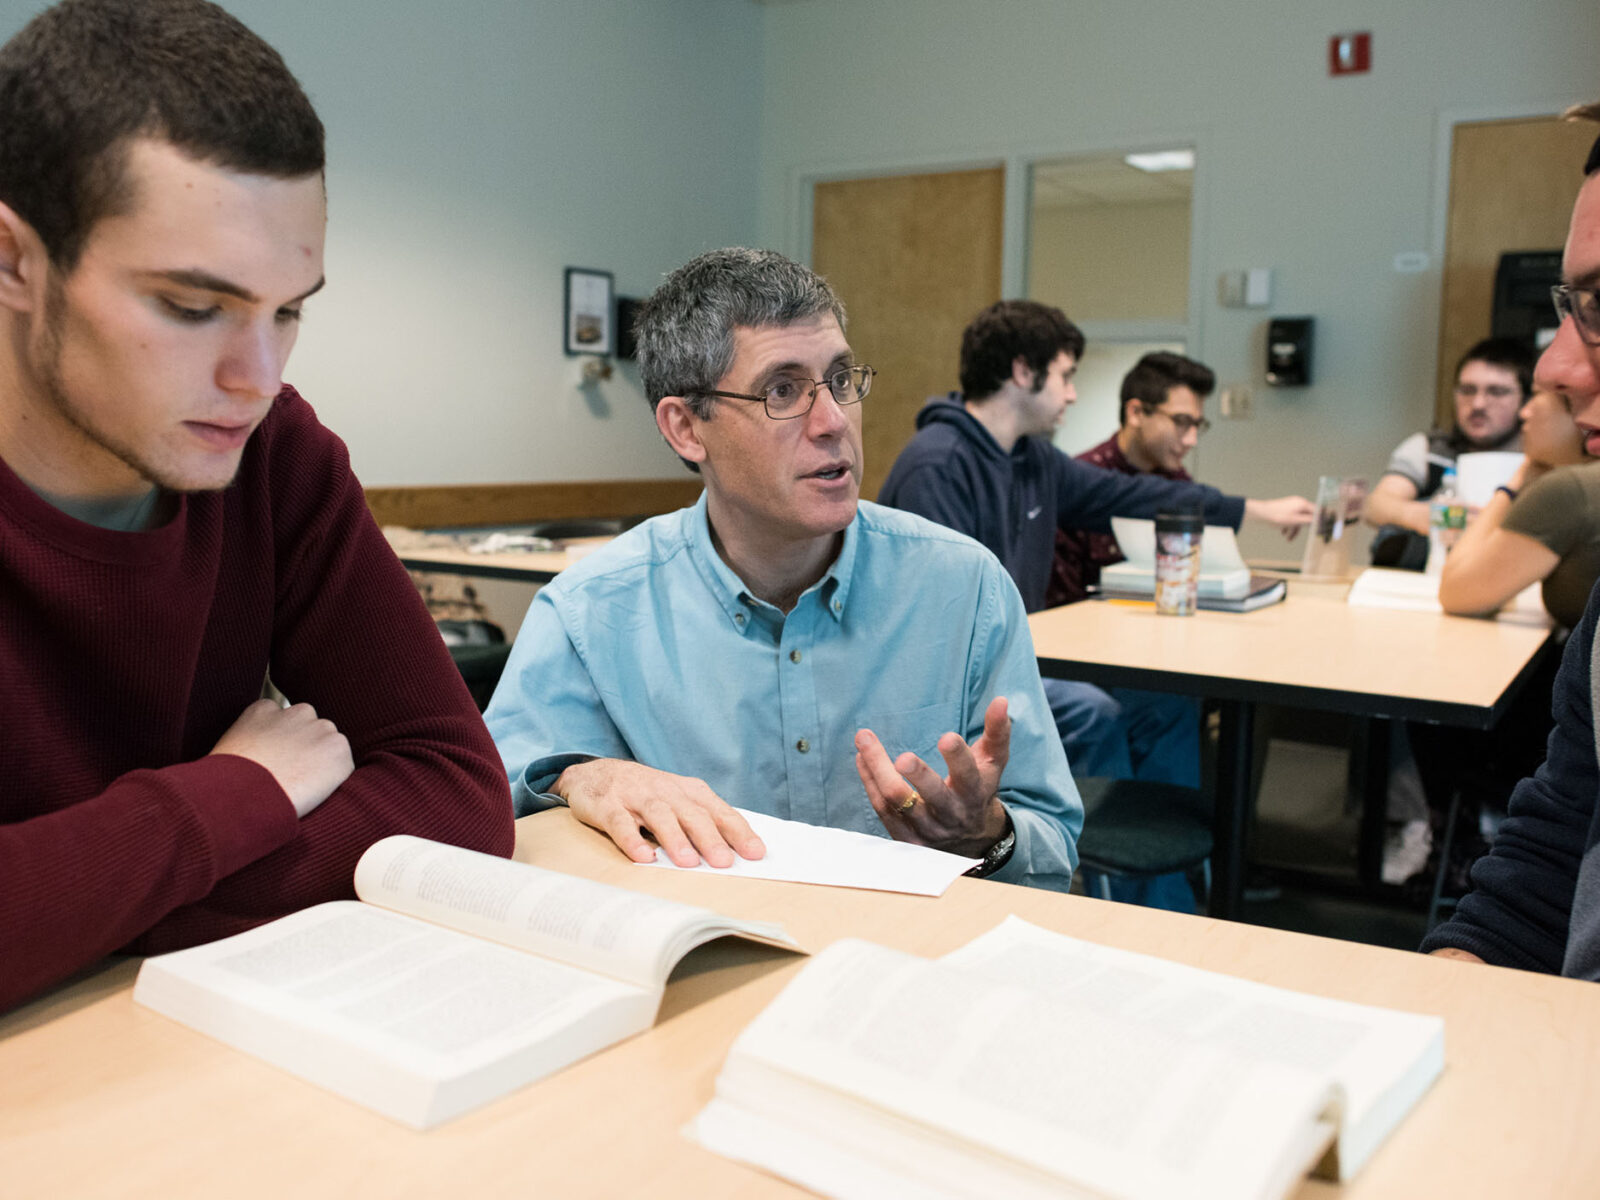 professor assisting two students with their reading assignment